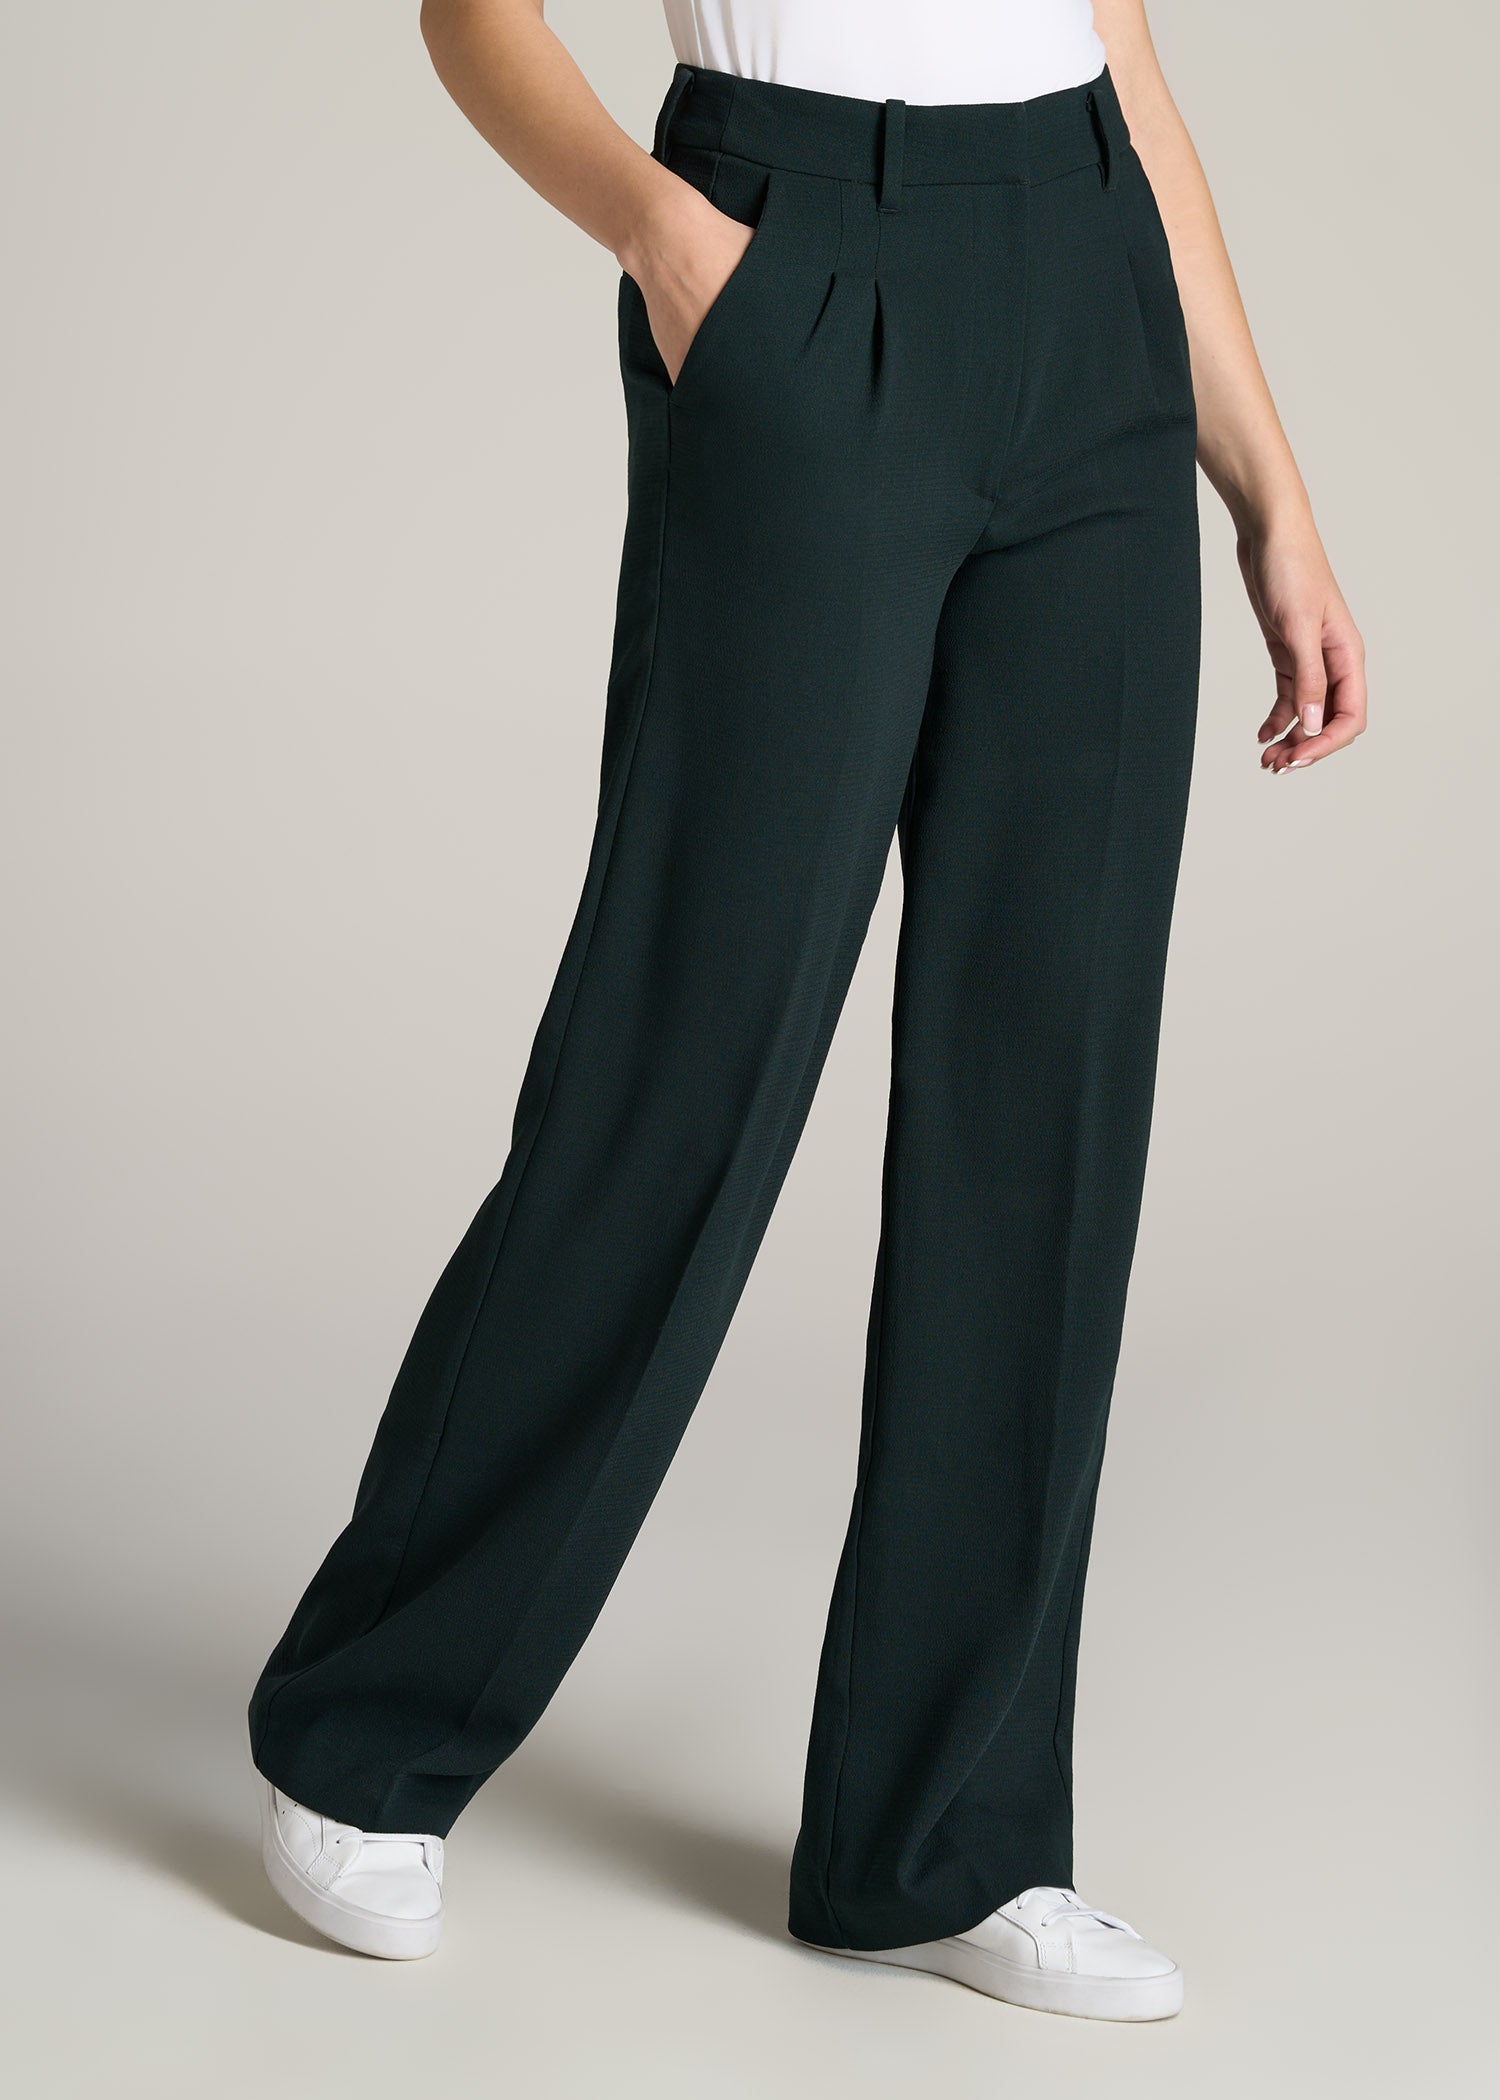 Pleated WIDE Leg Dress Pants for Tall Women in Midnight Green